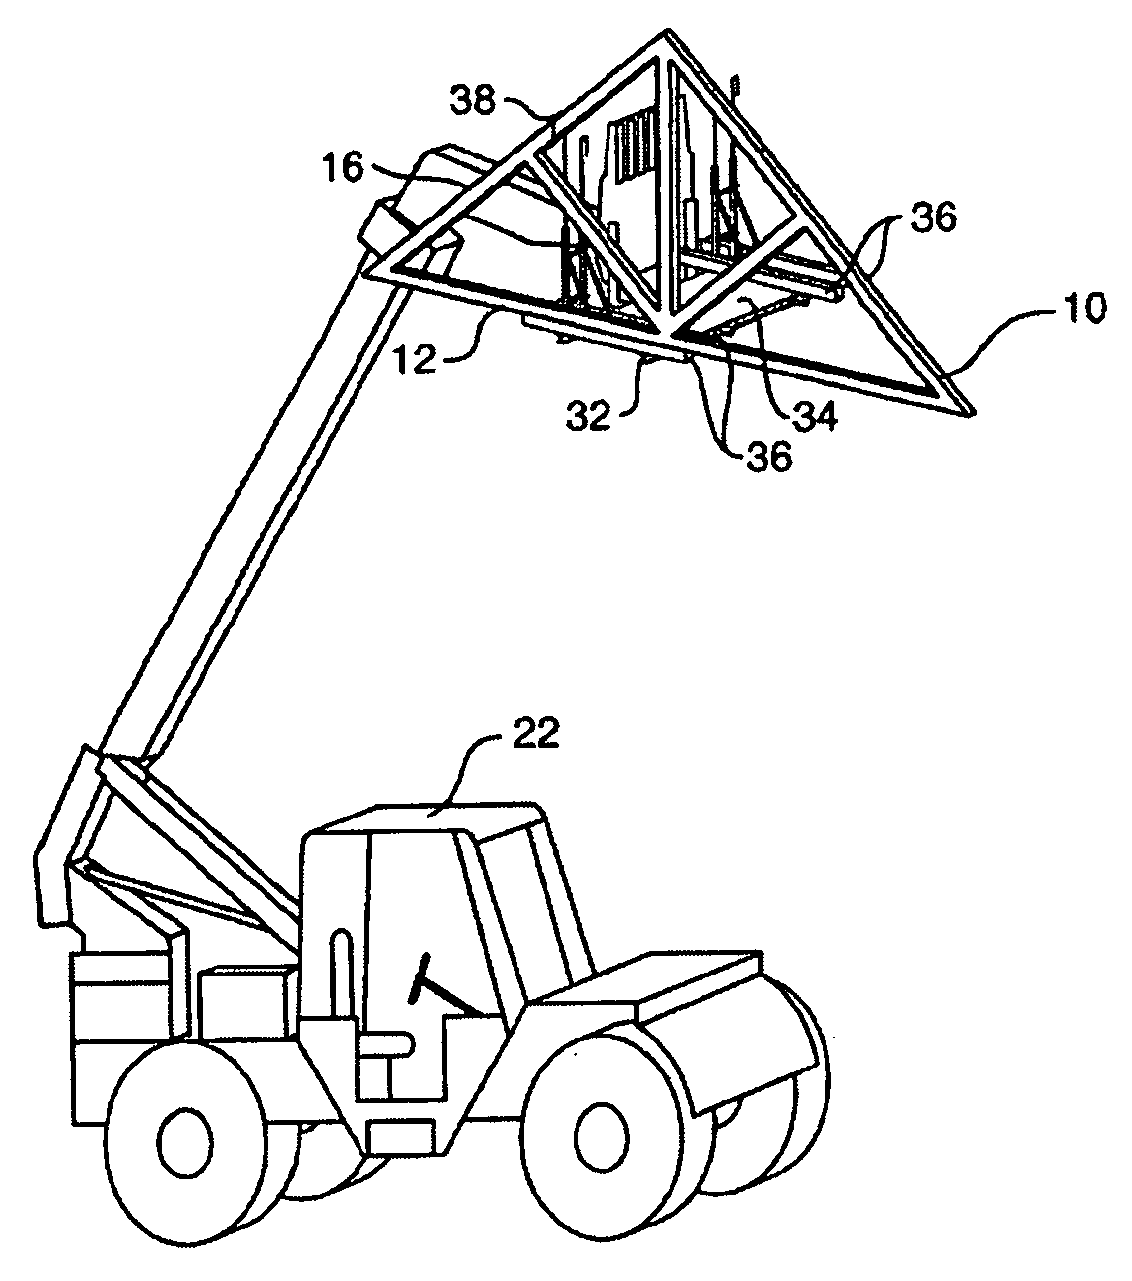 System for transporting and installing roof trusses